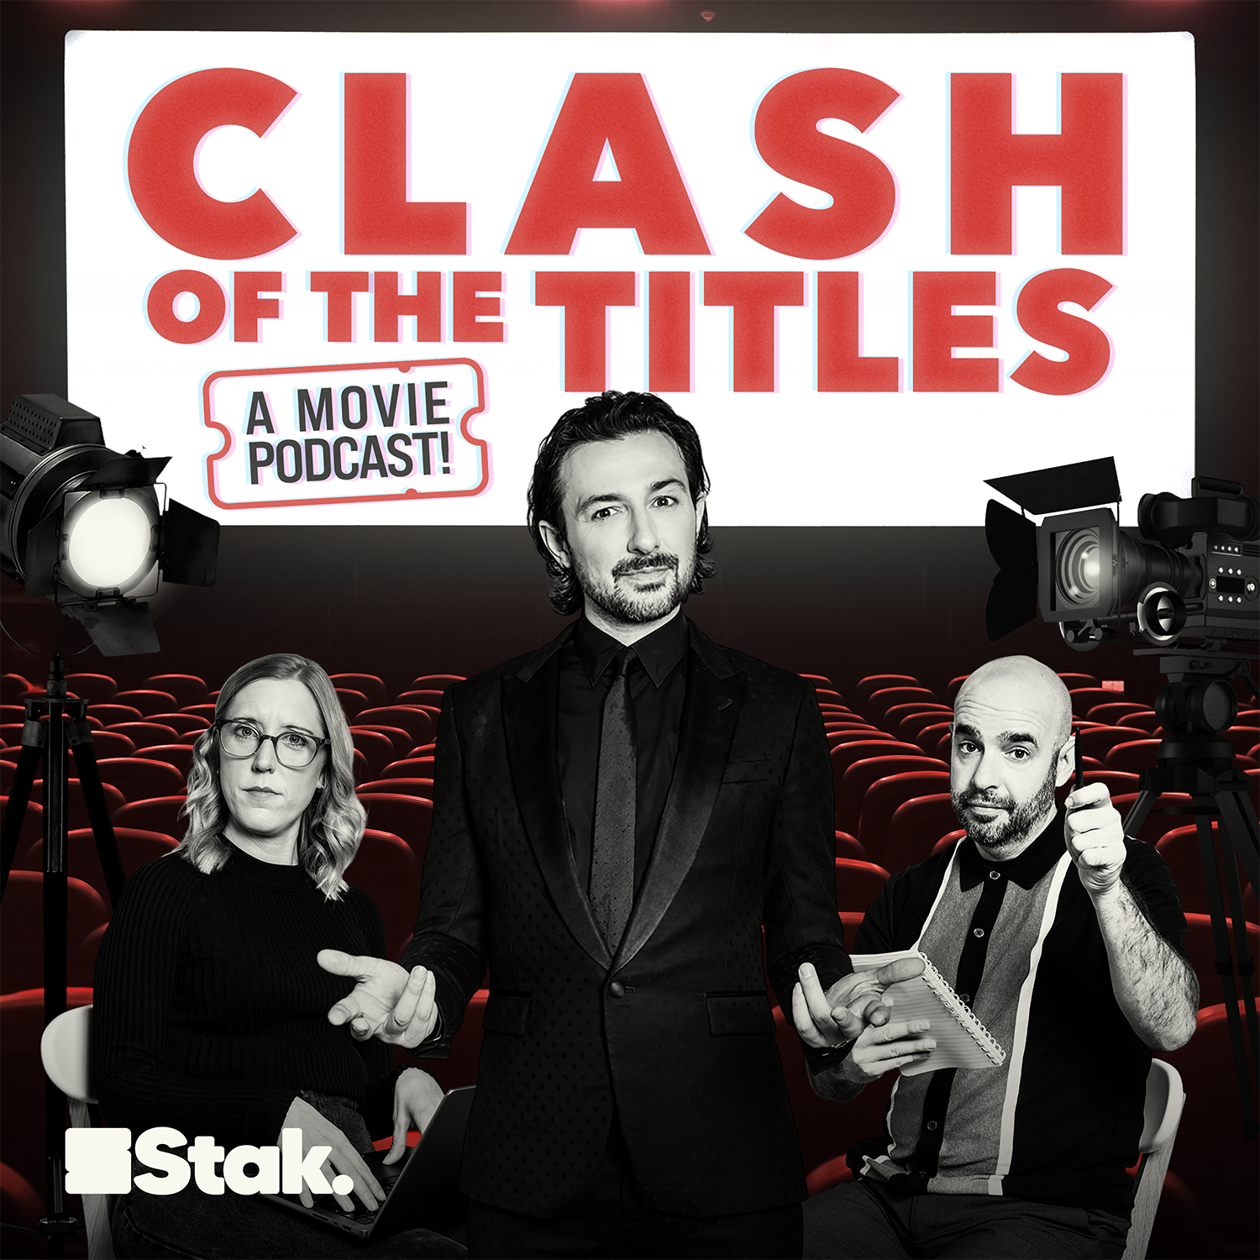 Artwork for the Clash Of The Titles - a movie podcast! podcast.